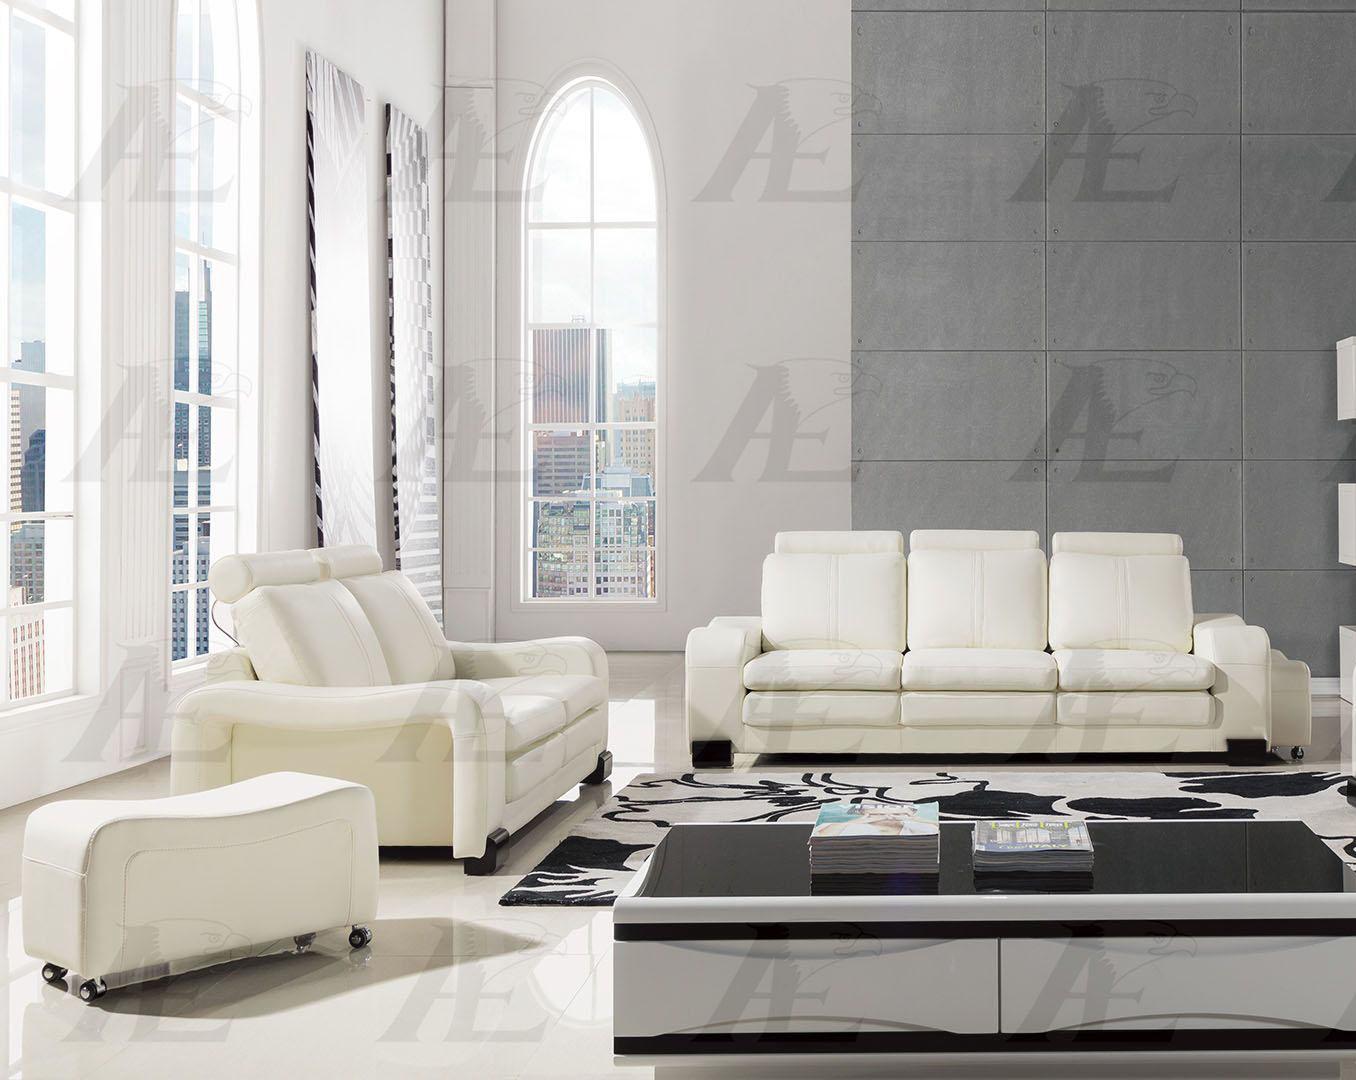 Contemporary, Modern Sofa Set AE210-IV AE210-IV-4PC in Ivory Faux Leather